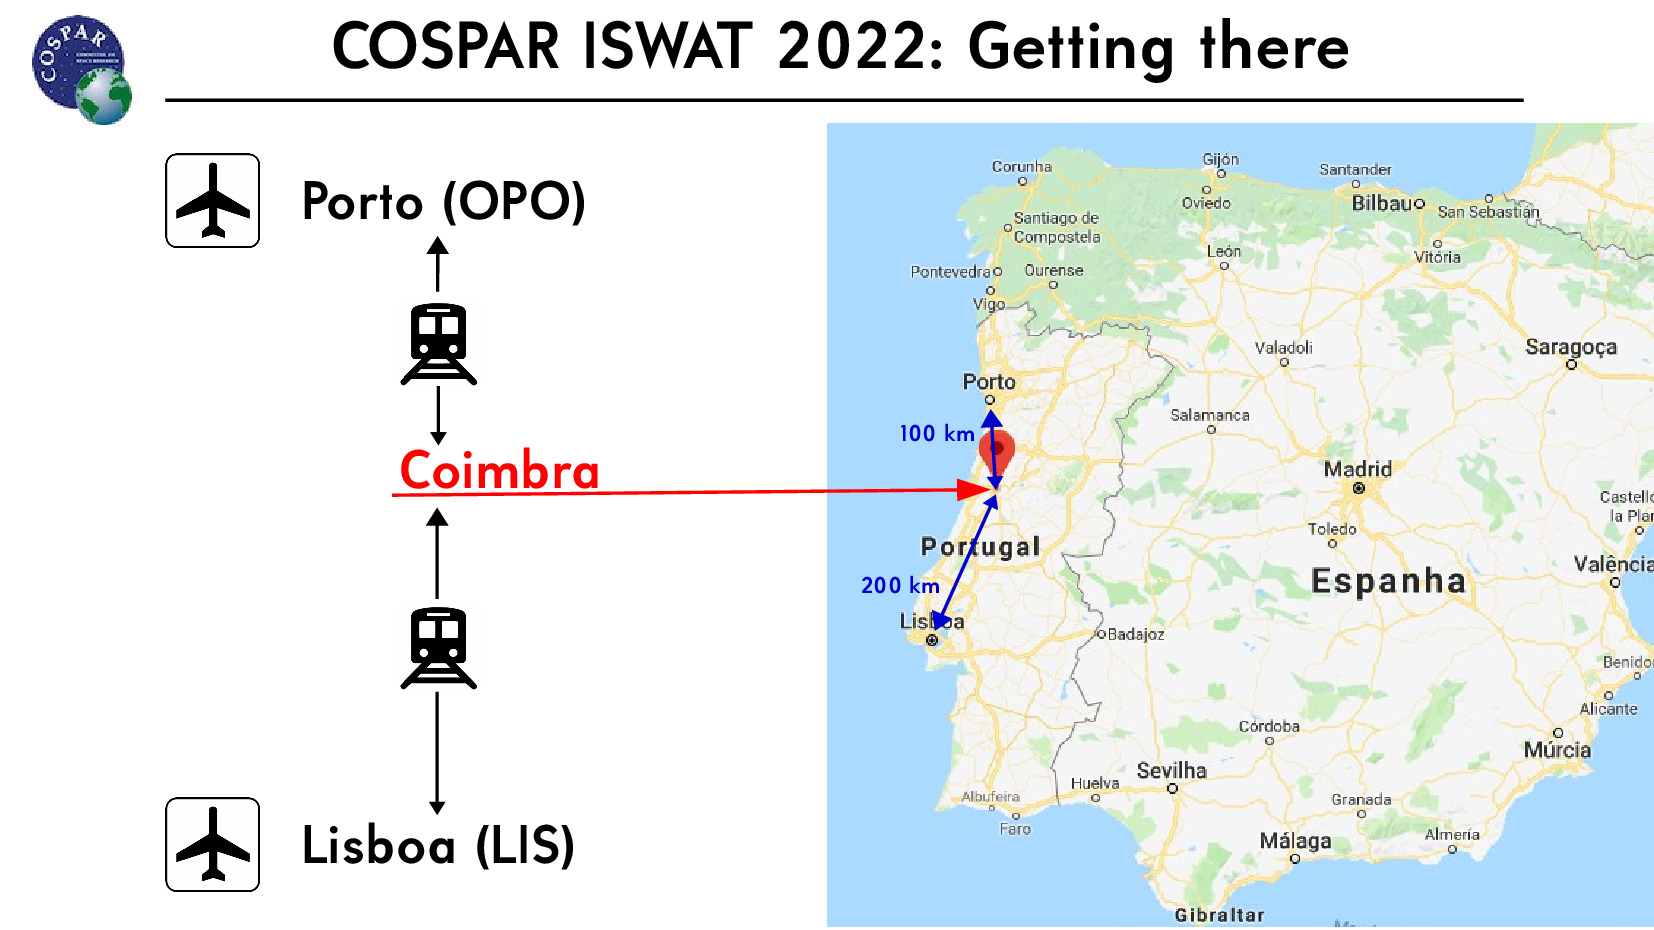 Getting to Coimbra